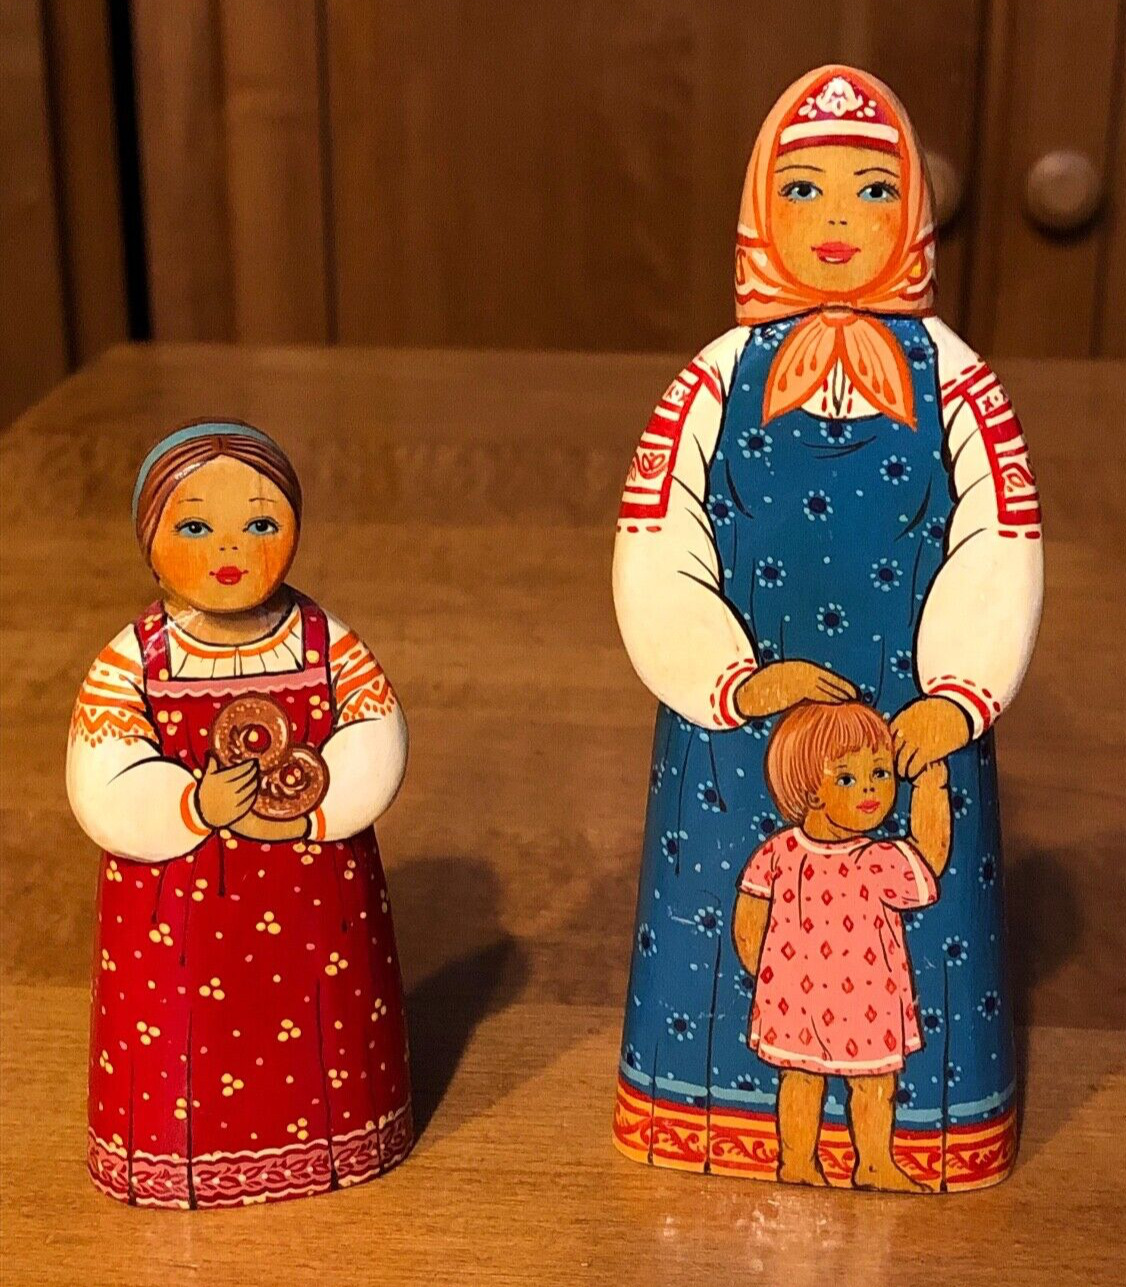 Set of 2 Vintage Hand Painted Small Russian Wooden Dolls Girl Figurines - Signed